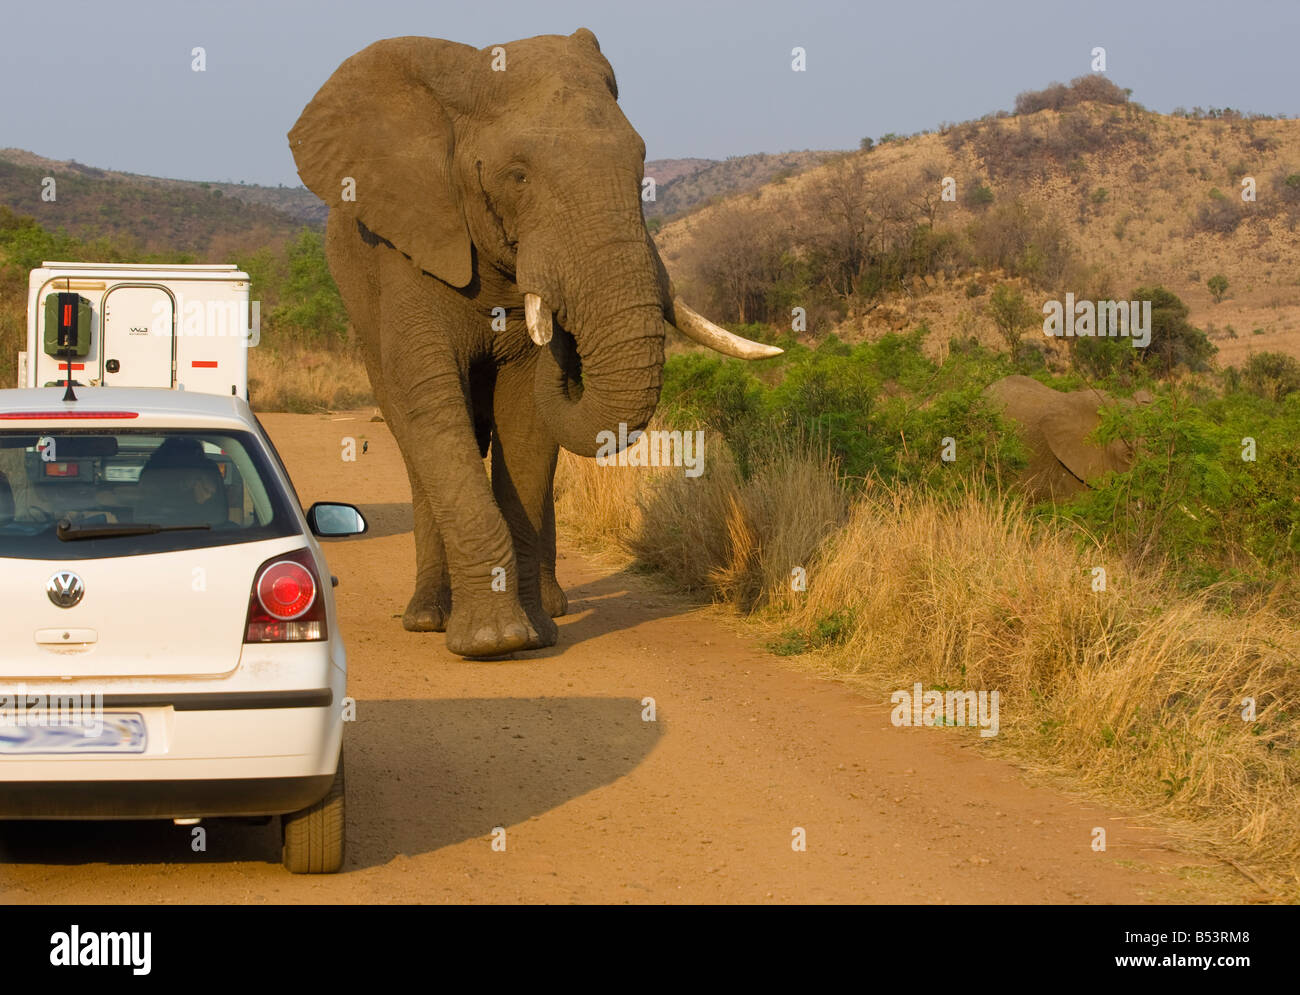 elephant-game viewing Stock Photo